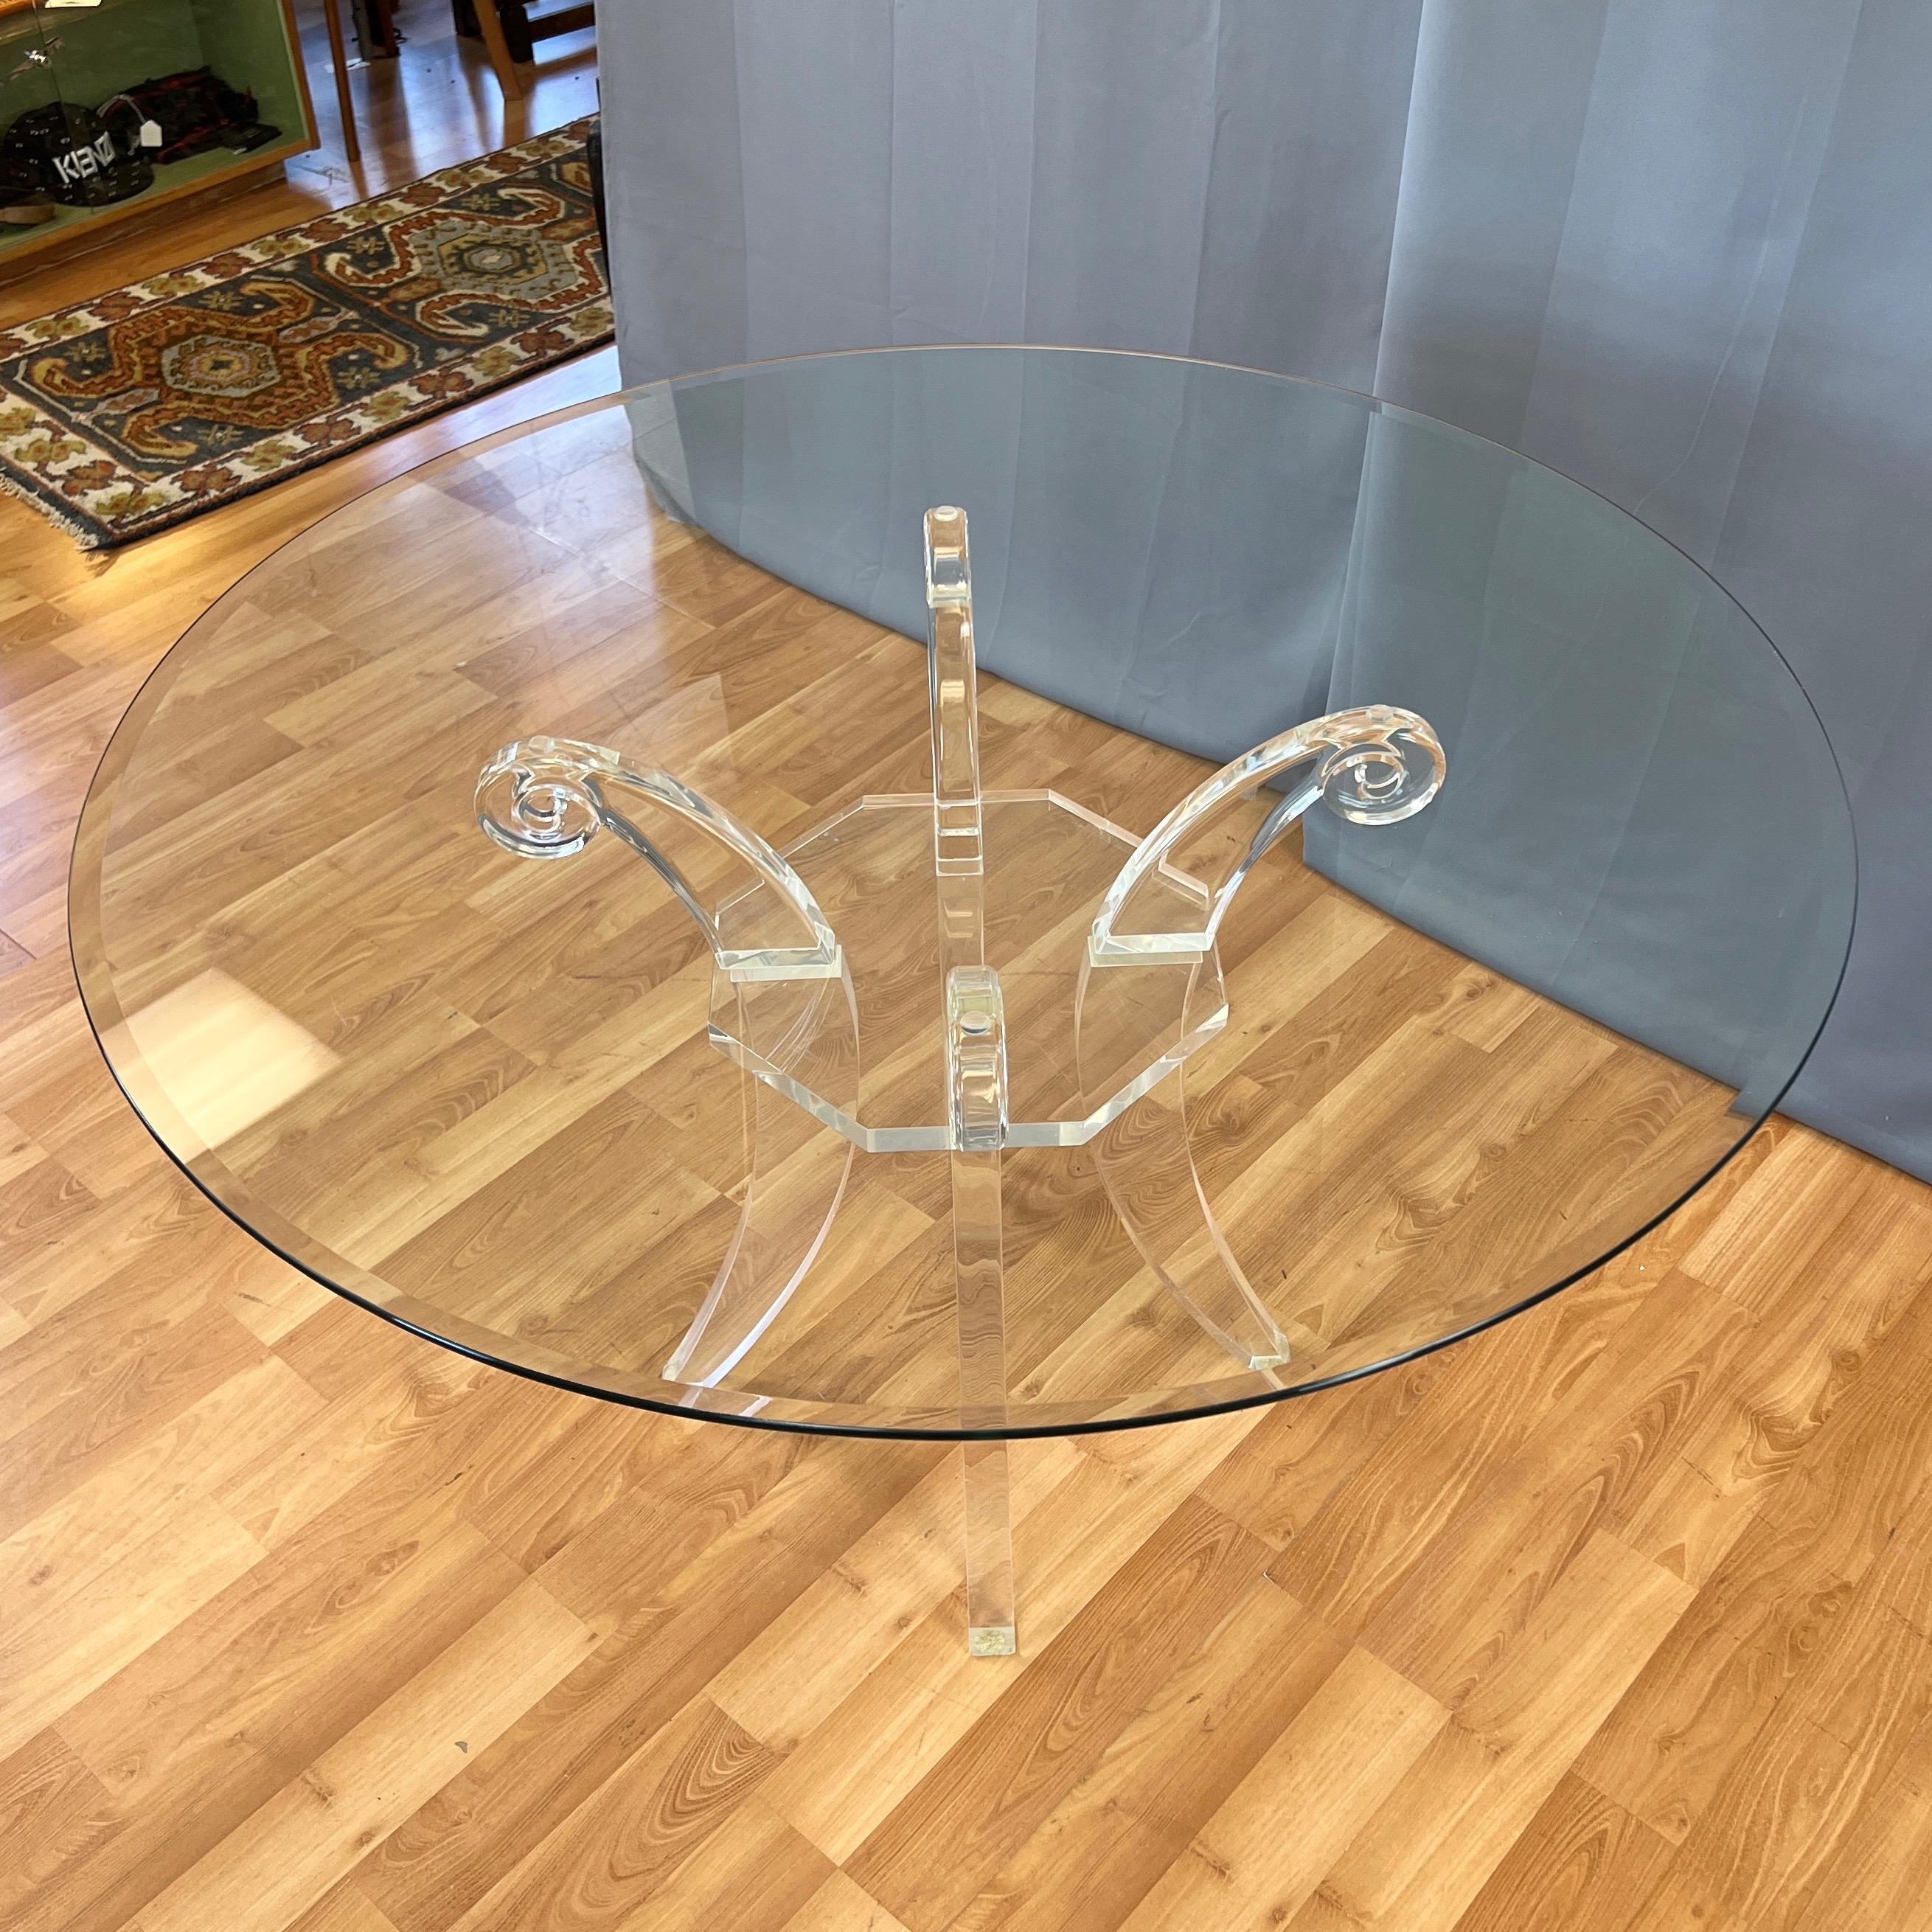 Beveled Lucite Saber Leg Scroll-Motif Dining Table with Round Glass Top, circa 1980